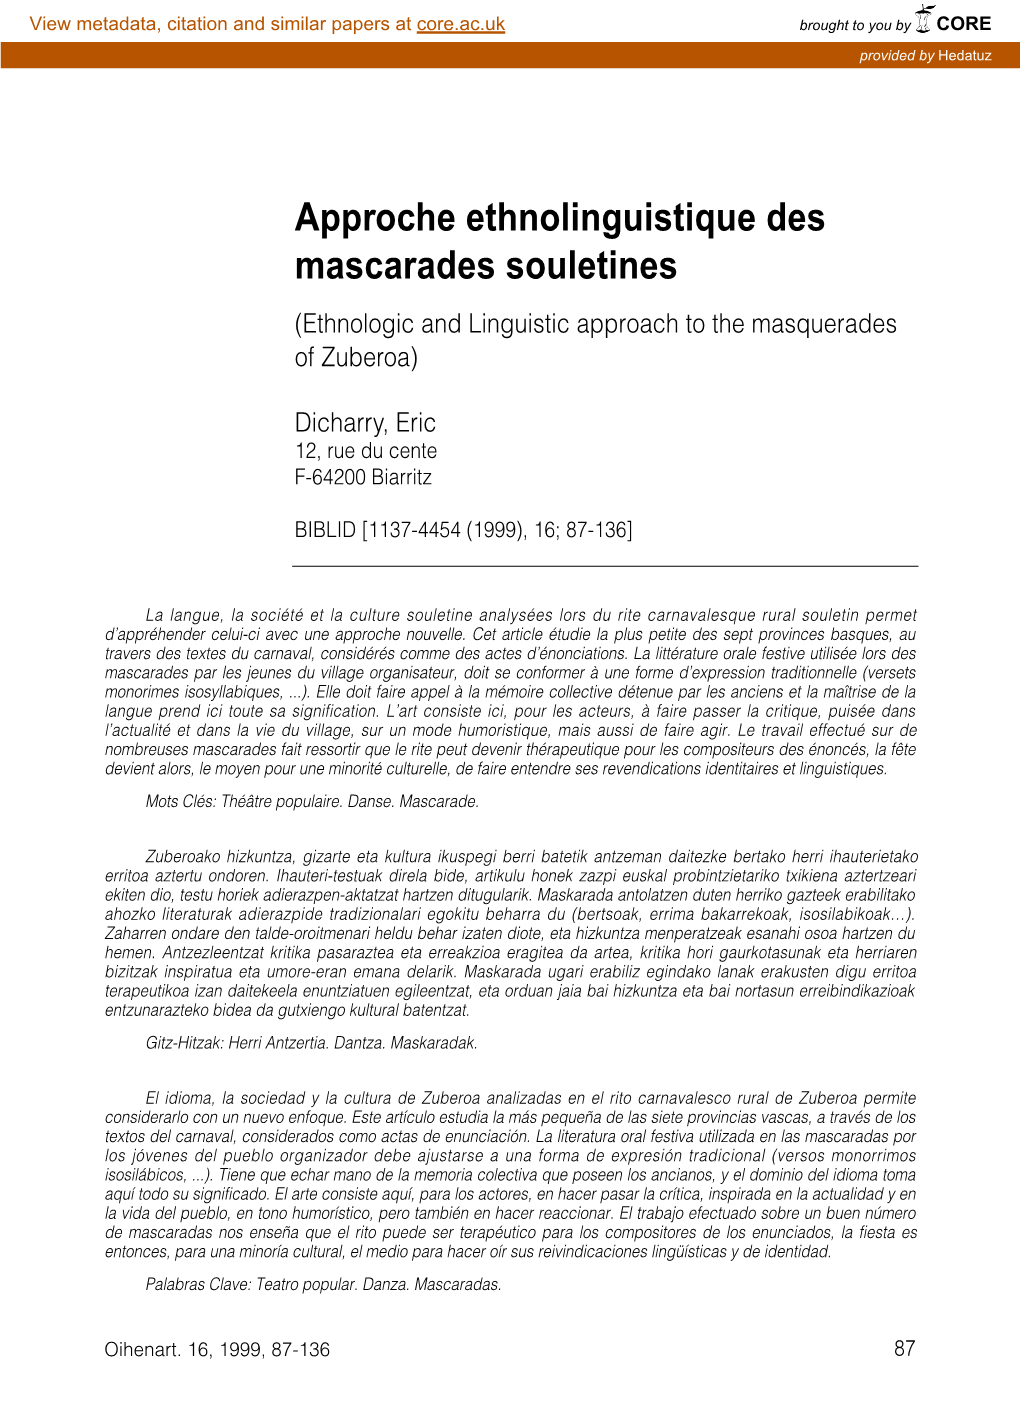 Approche Ethnolinguistique Des Mascarades Souletines (Ethnologic and Linguistic Approach to the Masquerades of Zuberoa)